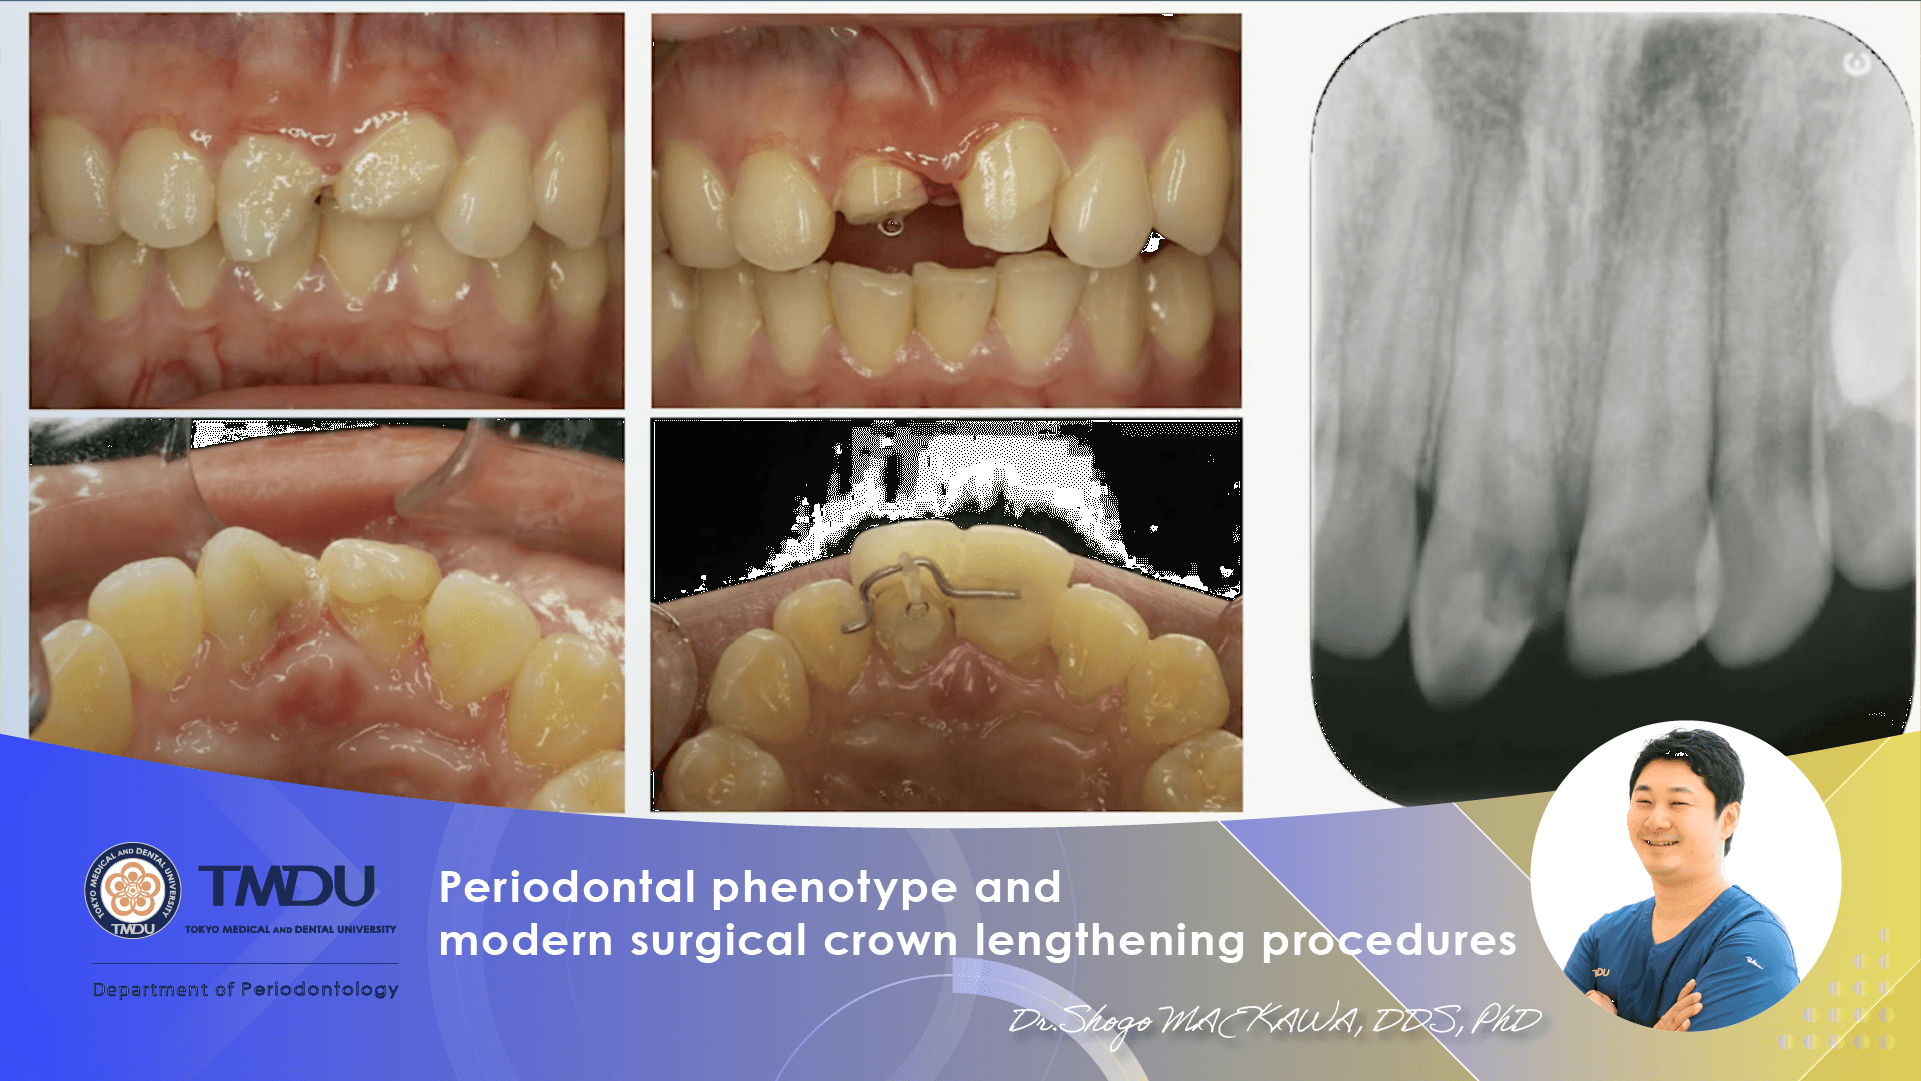 Periodontal phenotype and modern surgical crown lengthening procedures